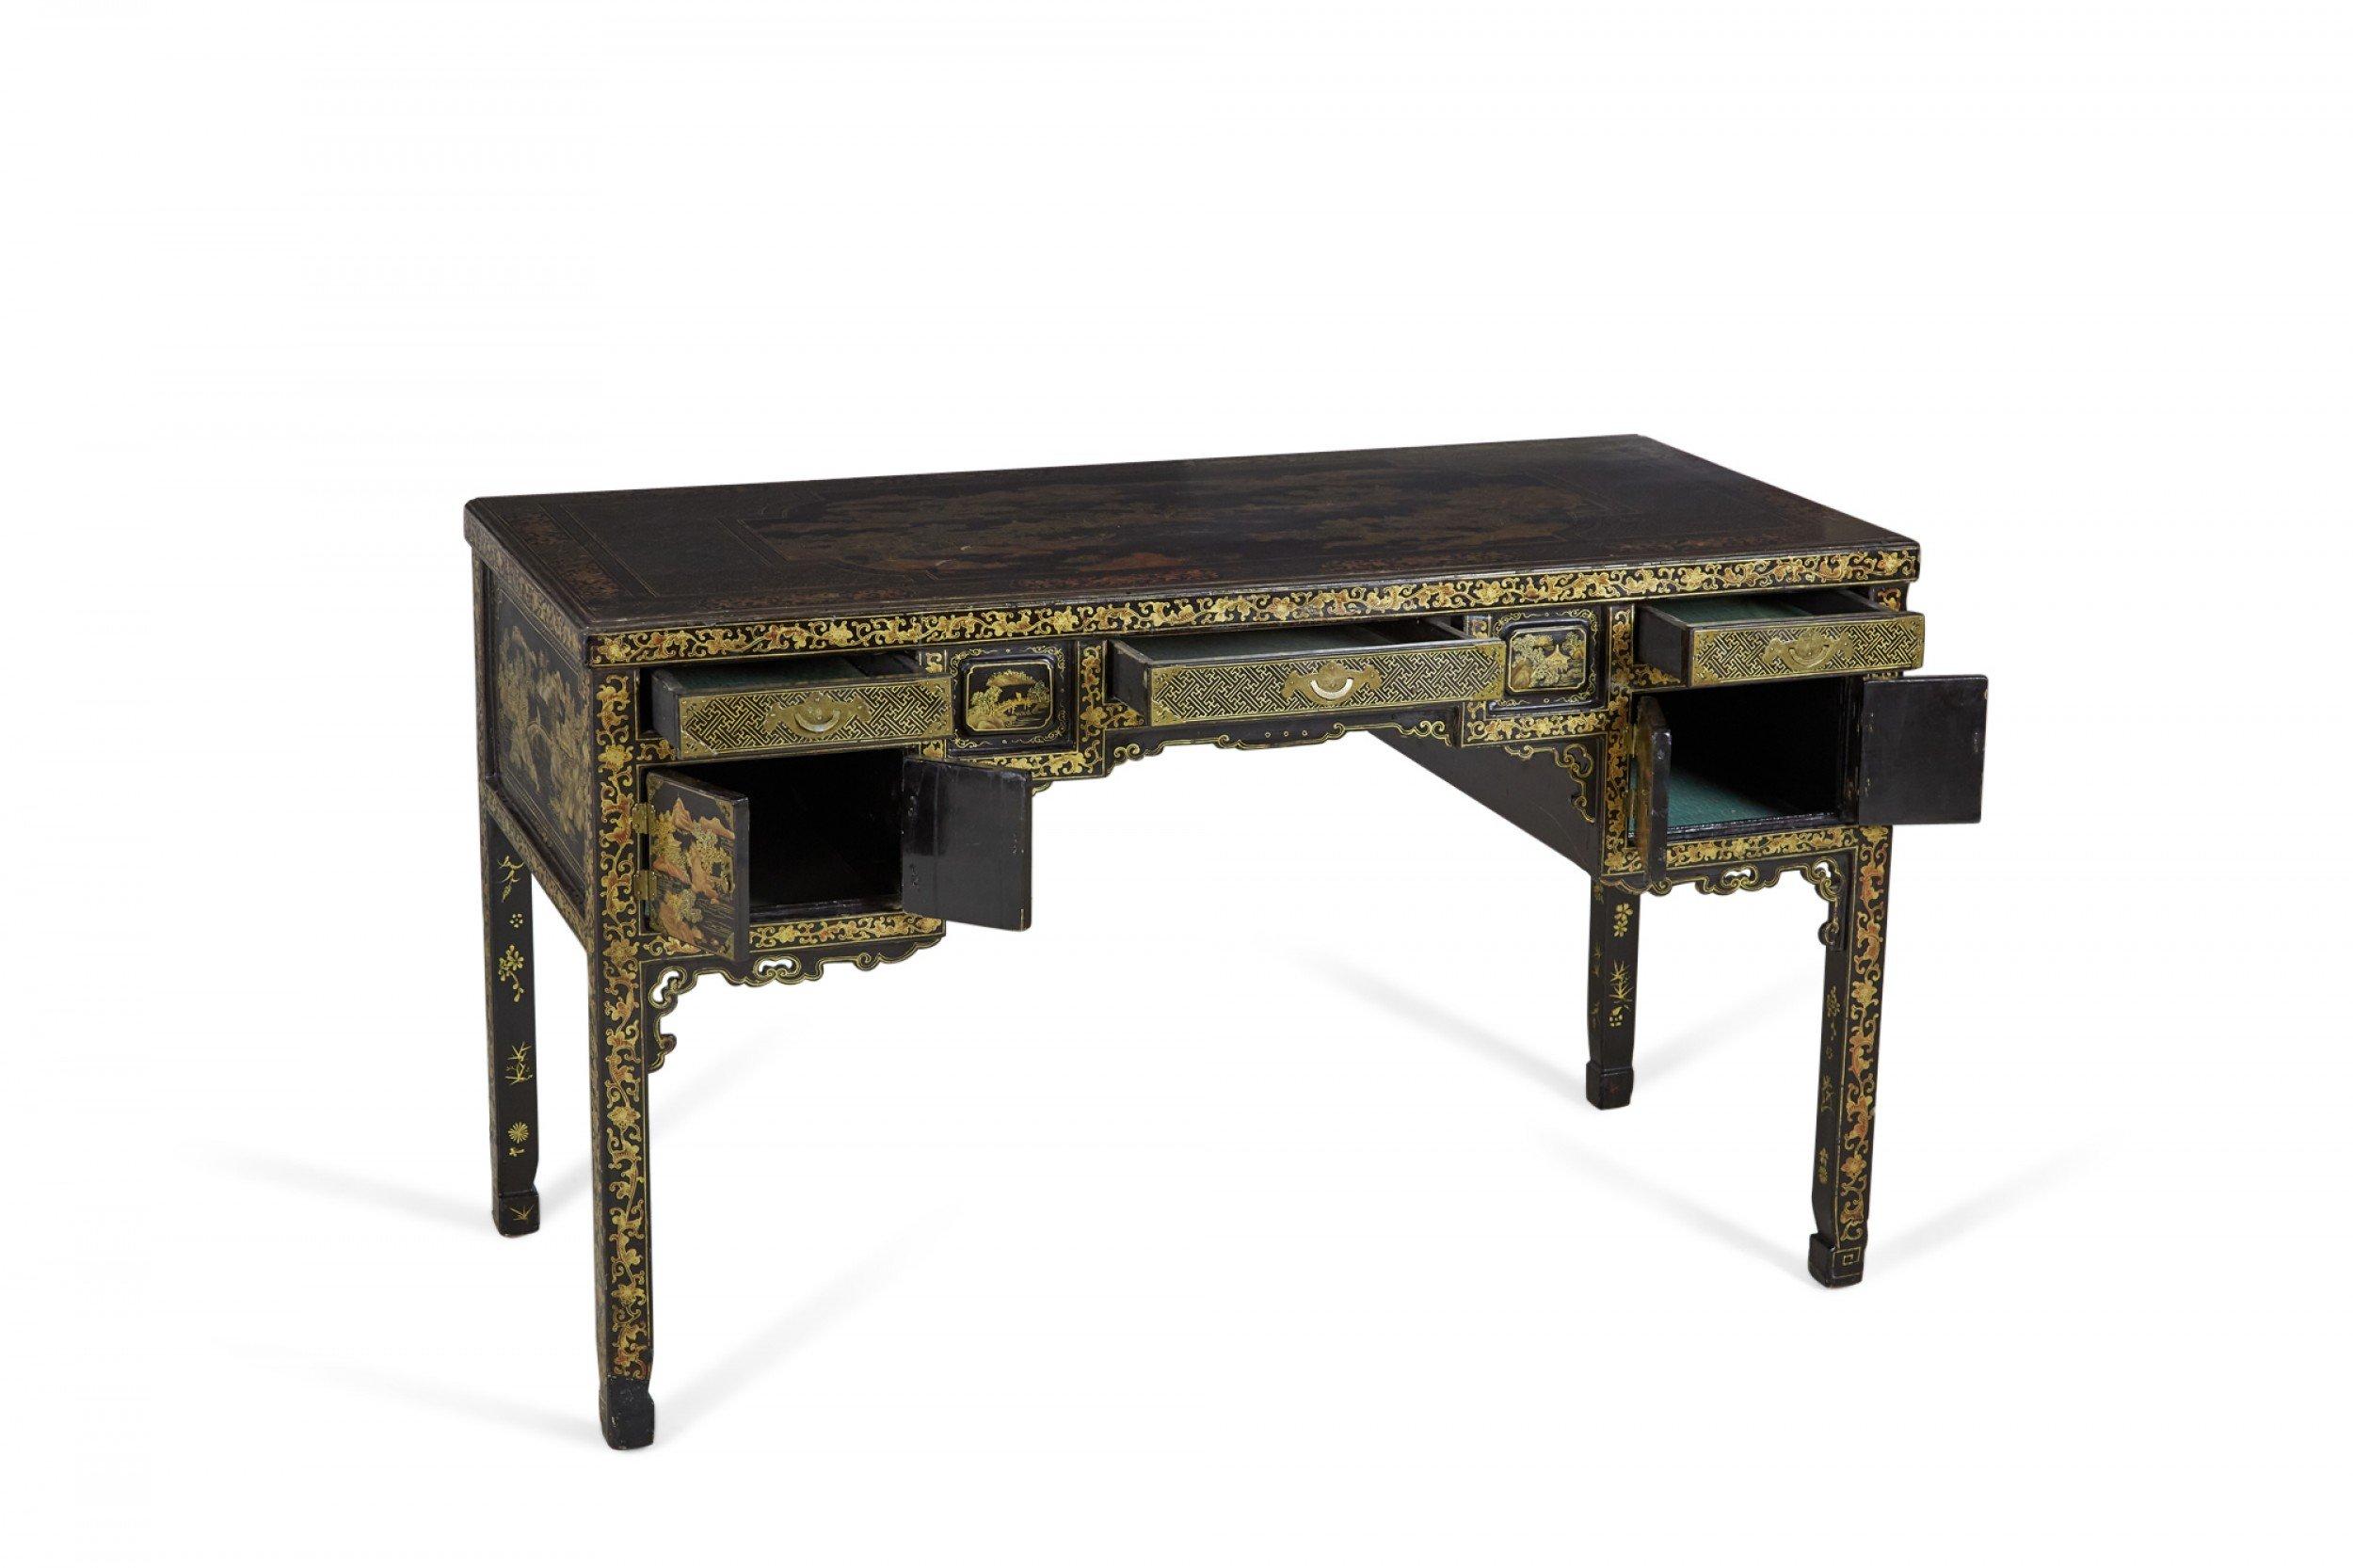 19th Century English Regency Chinese Export Gilt Black Lacquer Desk For Sale 4